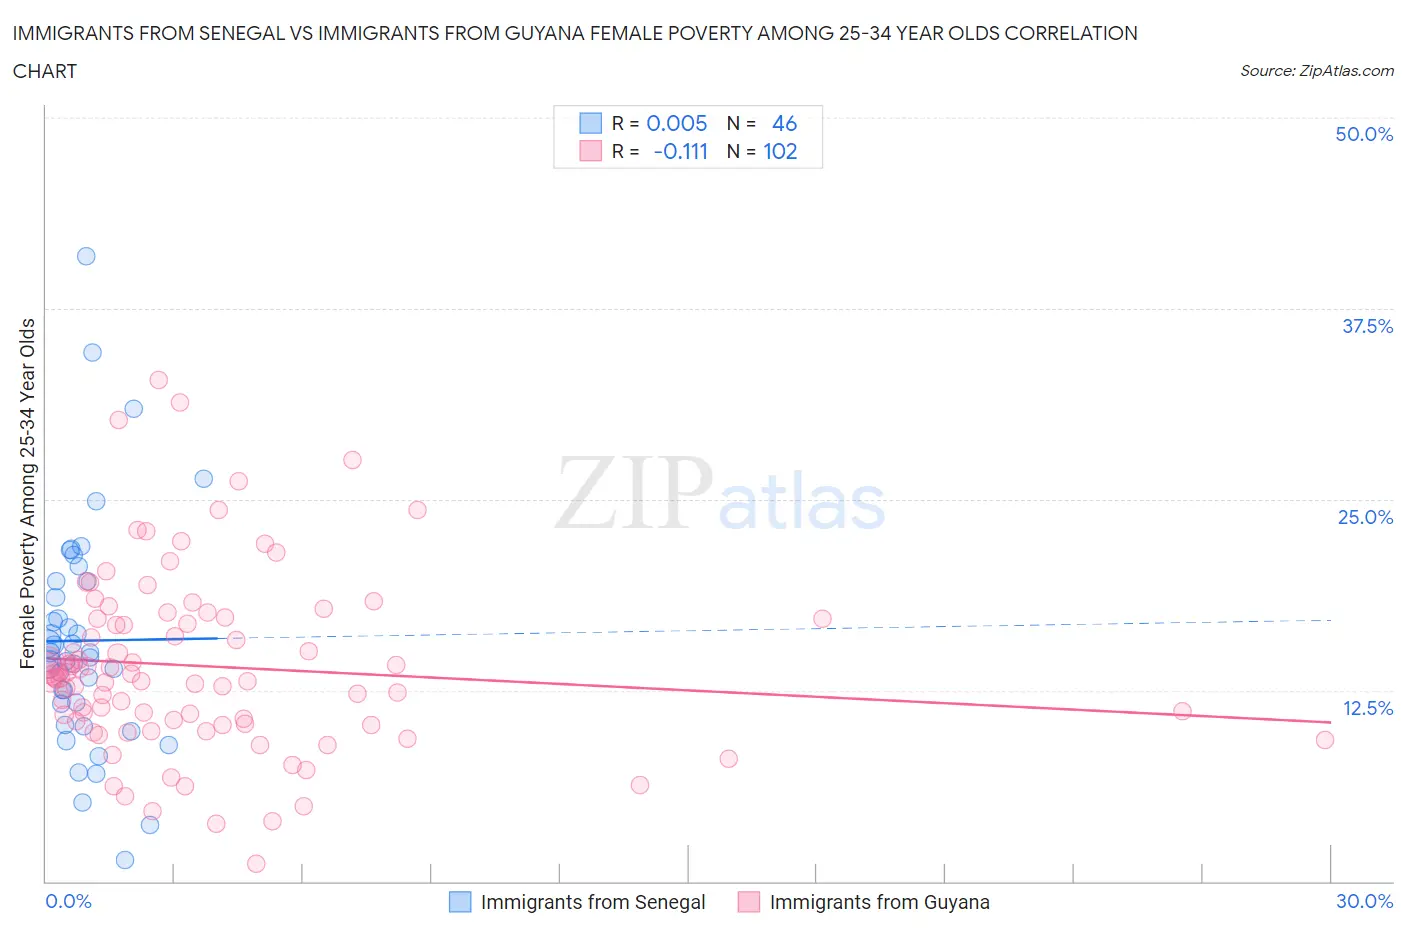 Immigrants from Senegal vs Immigrants from Guyana Female Poverty Among 25-34 Year Olds